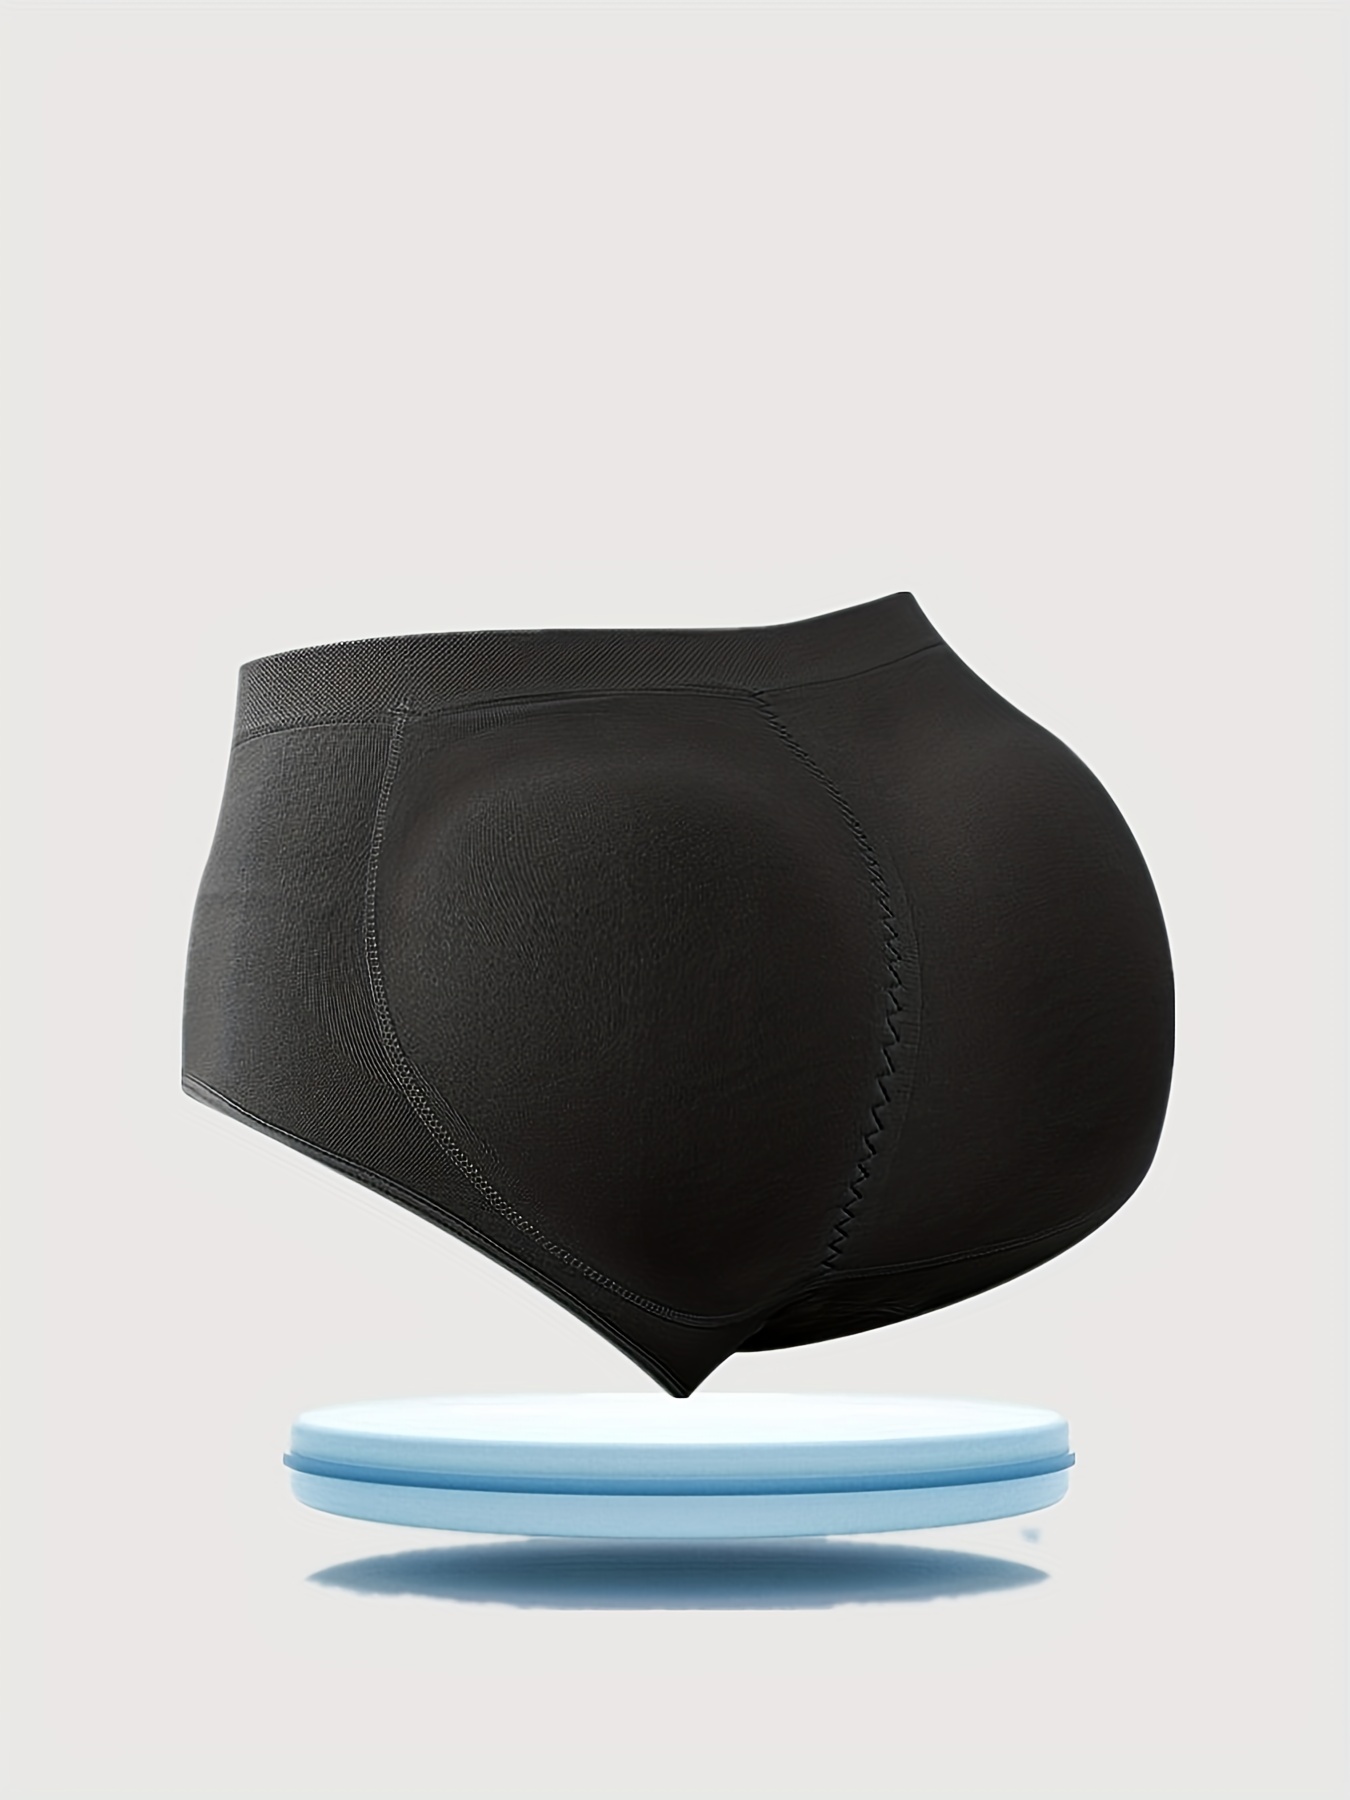 Women Pull-up Padding Panties Women's Butt Pads Breathable